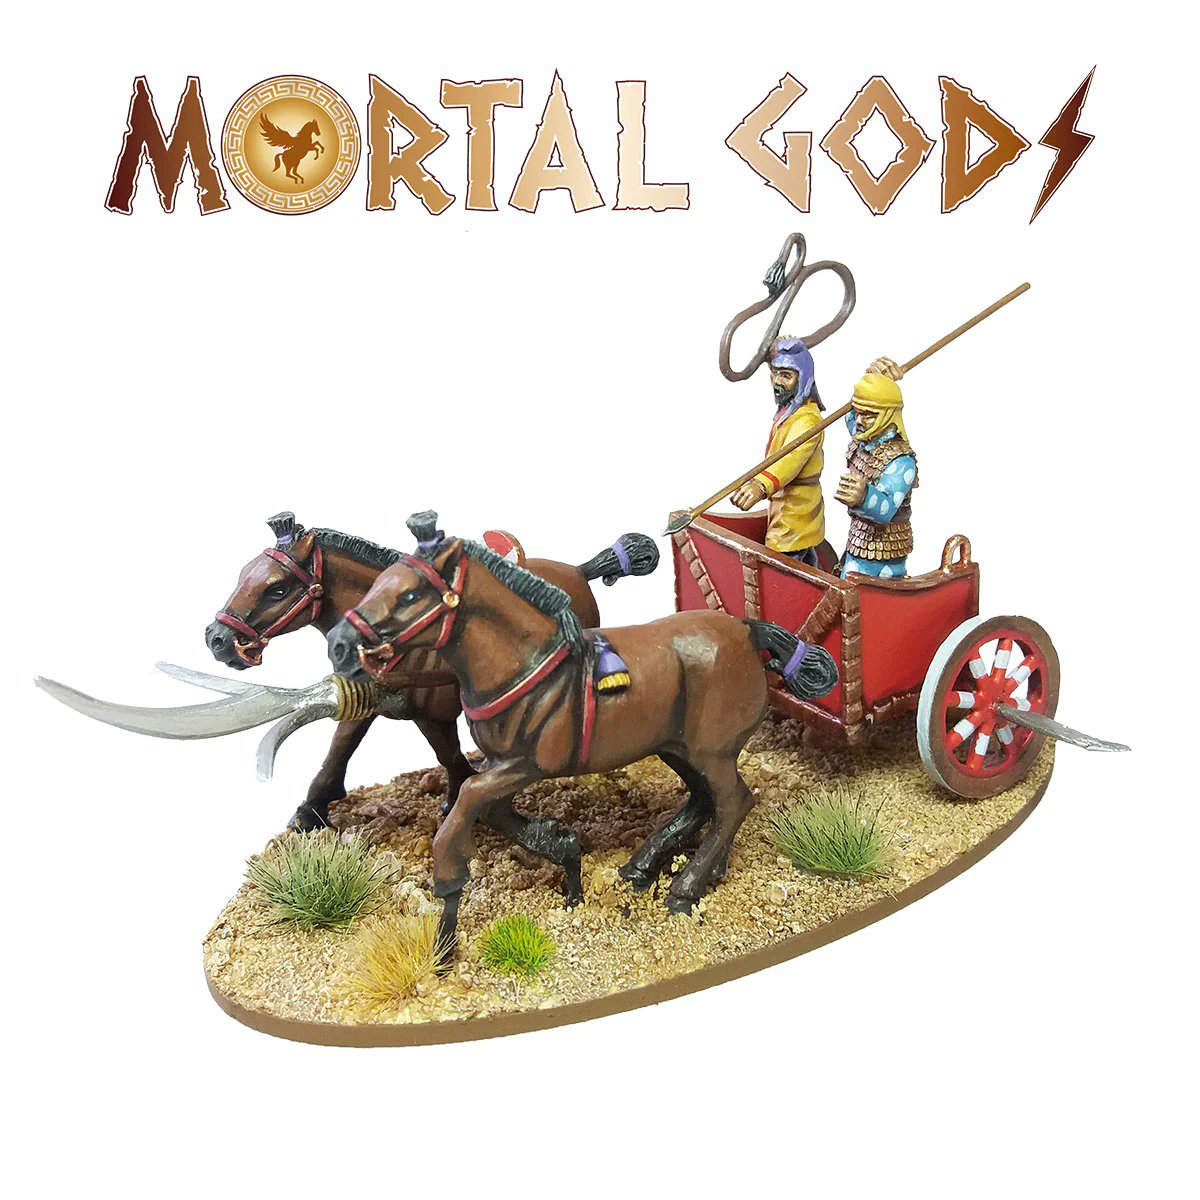 •Persian Chariot•
Excellent for getting around the battlefield, or leaving it if things are not quite working out
fsminis.link/fyw
#MythicGods #MortalGods #AncientGreece #Greece #Ancients #footsore #footsoreminiatures #SPG #wargaming #warmongers #gaming #minwargaming